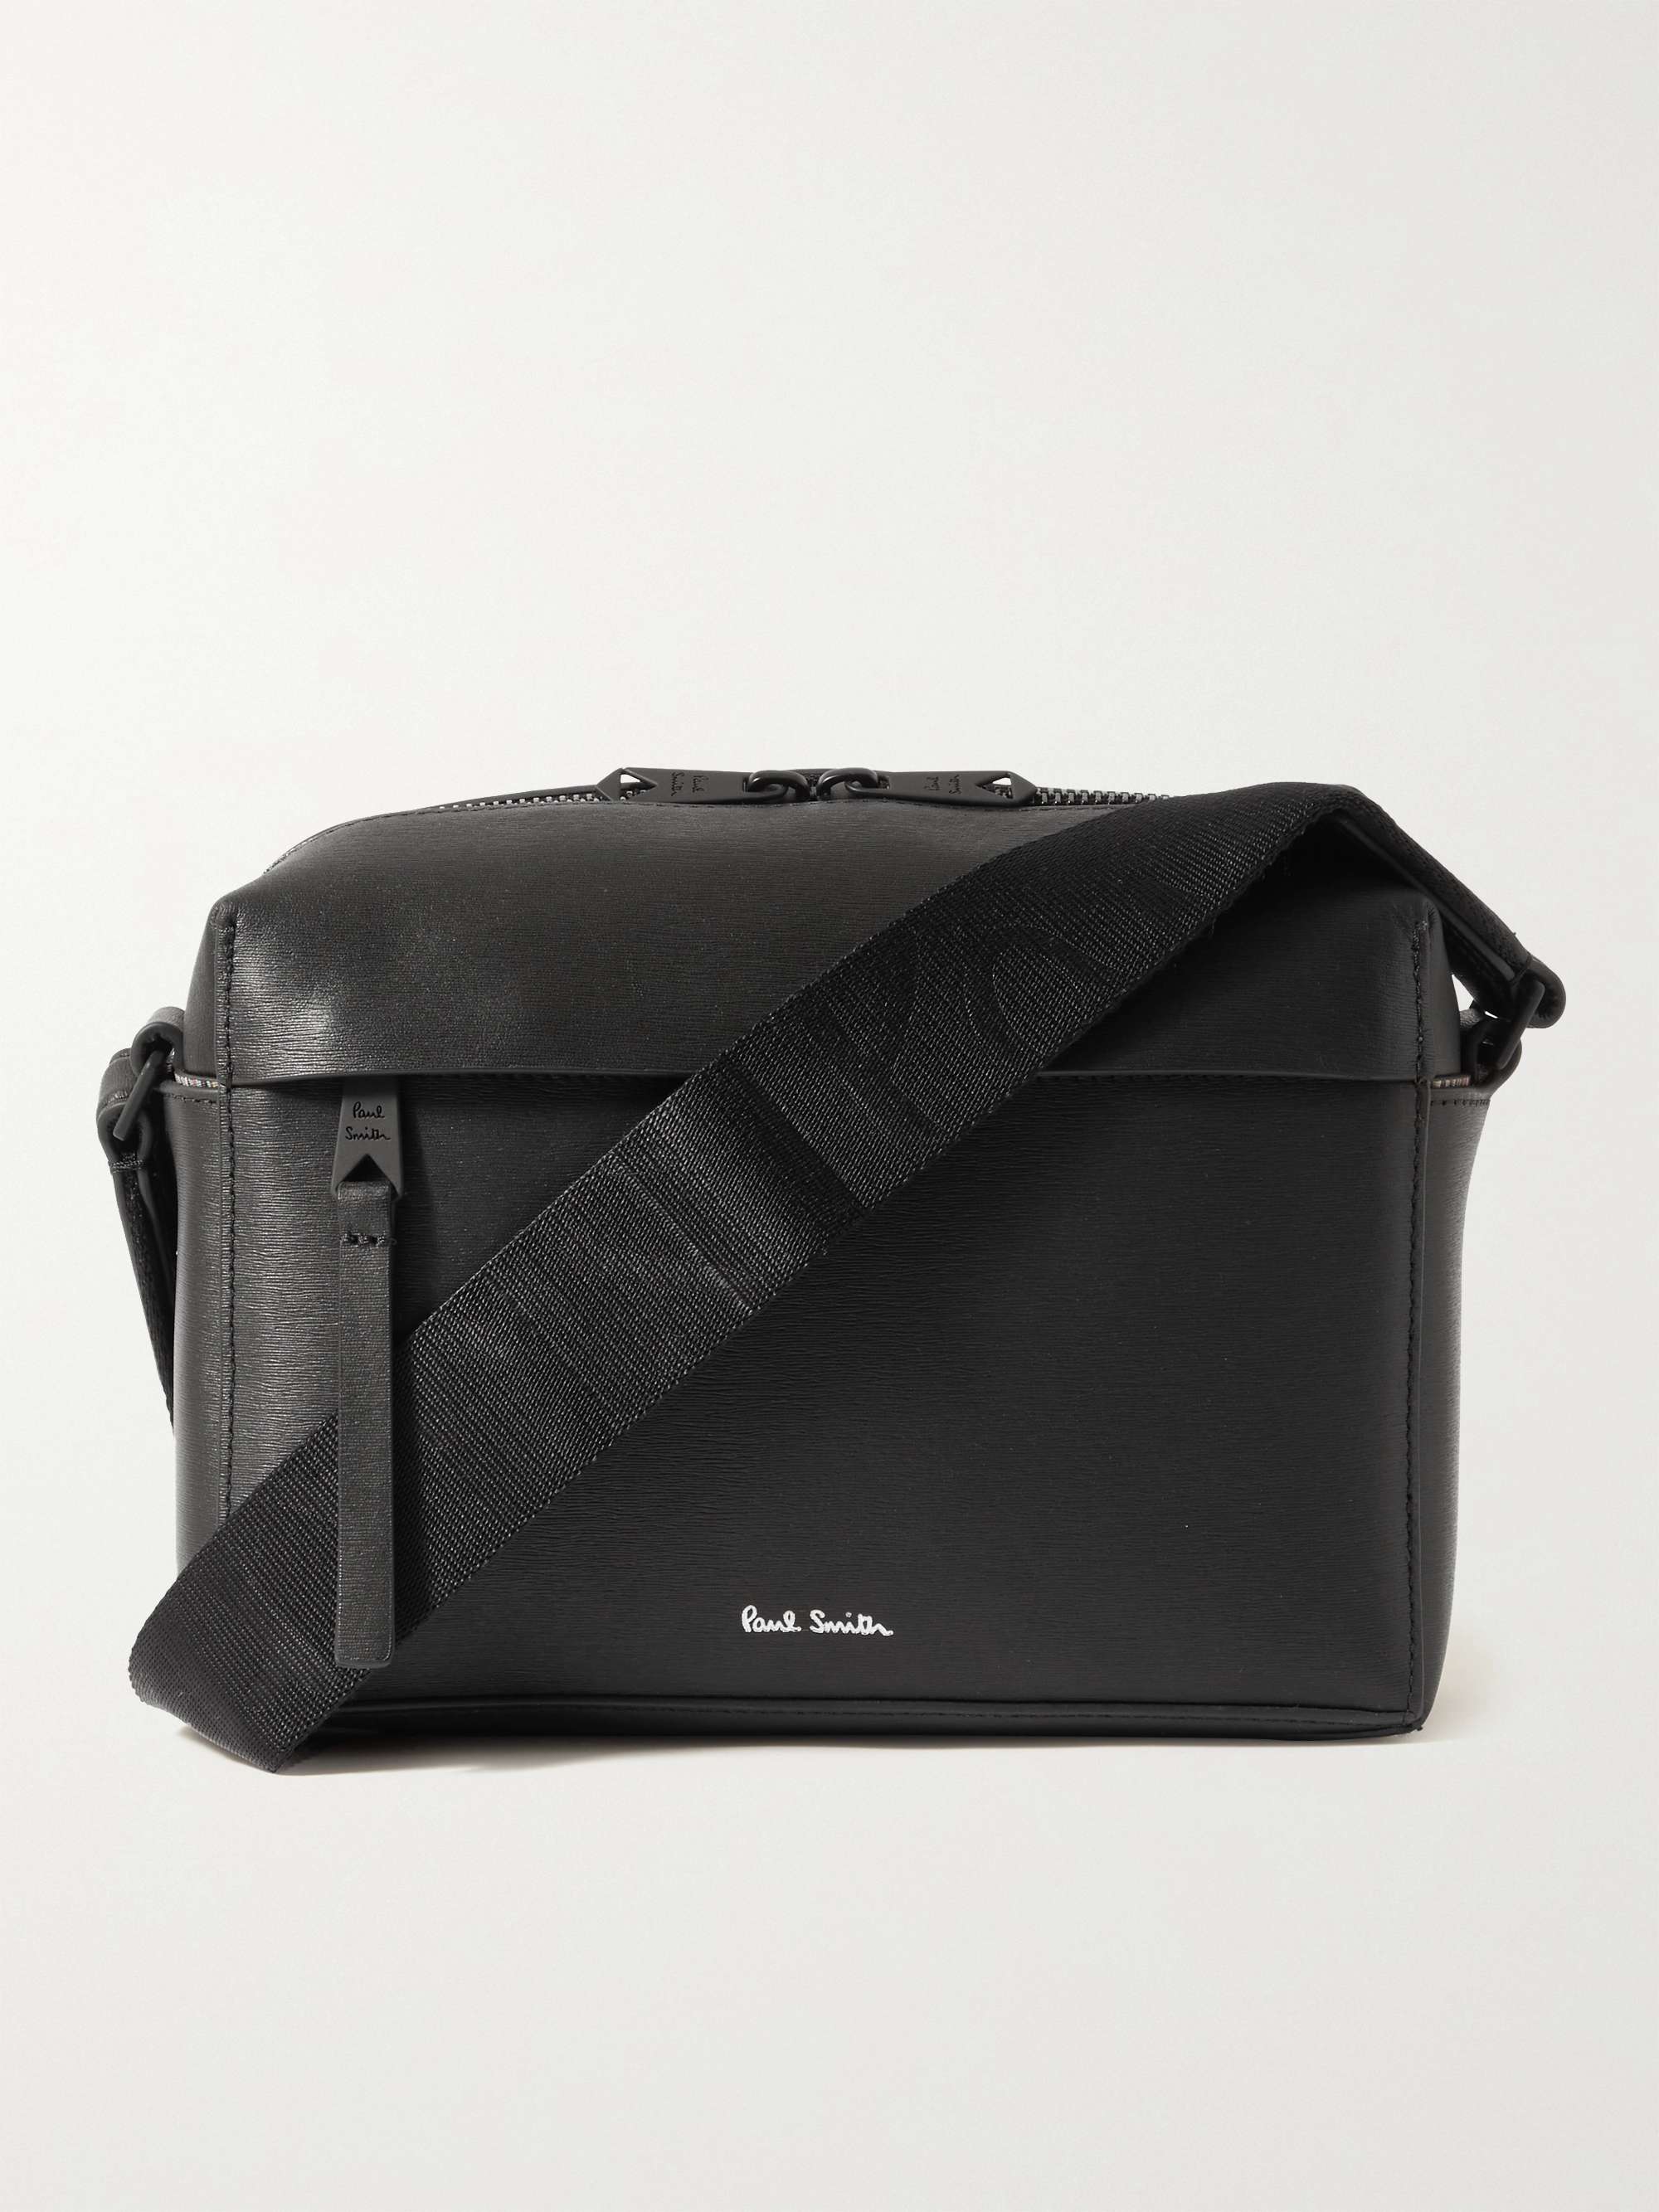 PAUL SMITH Embossed Textured-Leather Messenger Bag for Men